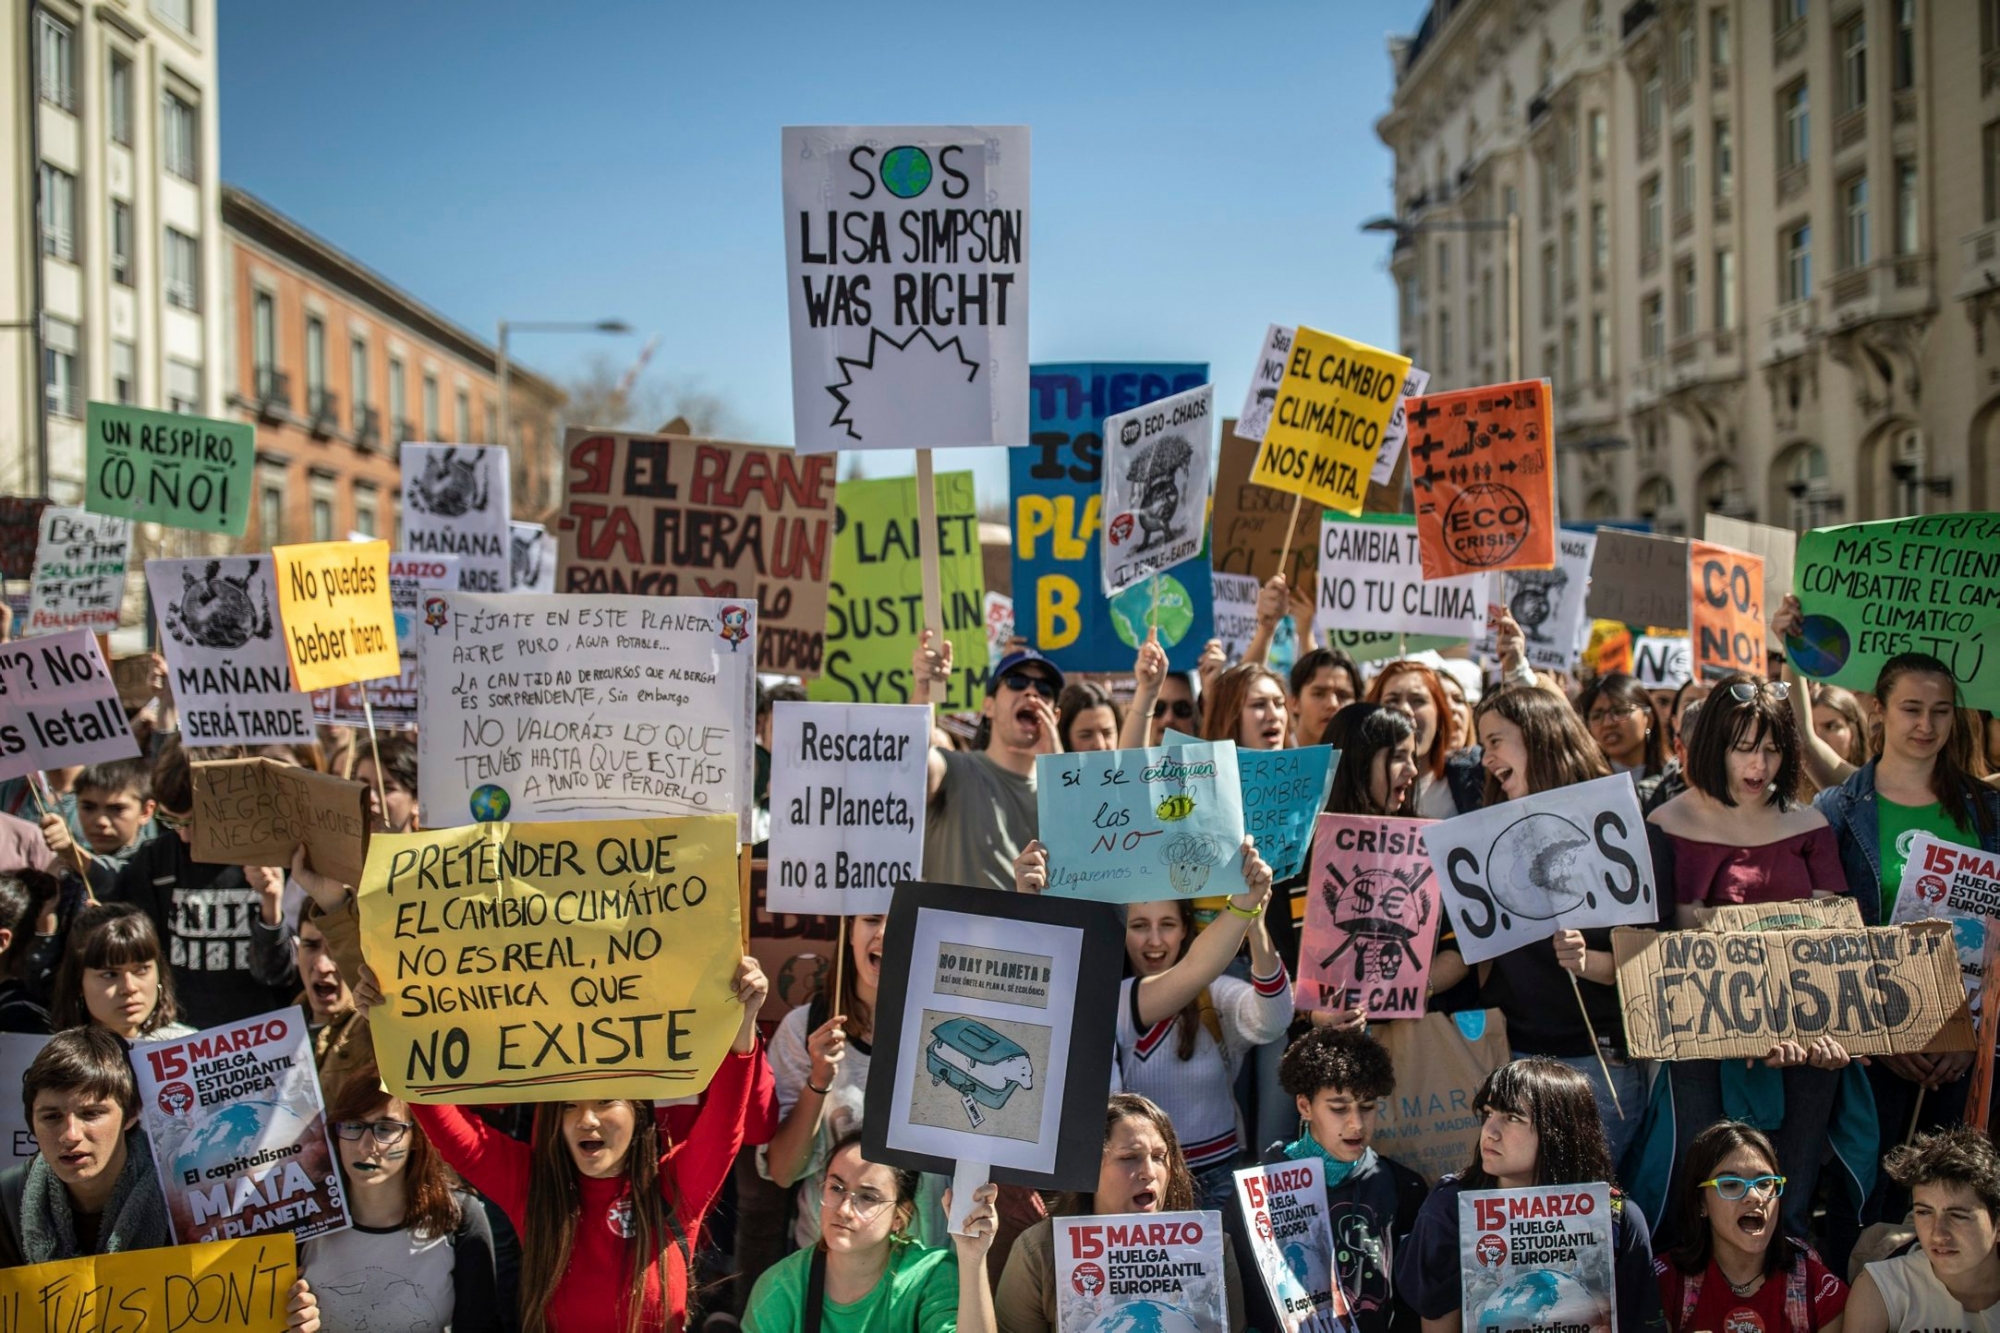 Students hold pro-environment banners during a rally in Madrid, Spain, Friday March 15, 2019. Students mobilized by word of mouth and social media skipped class Friday to protest what they believe are their governments' failure to take tough action against global warming. (AP Photo/Bernat Armangue) Spain Climate Student Protests